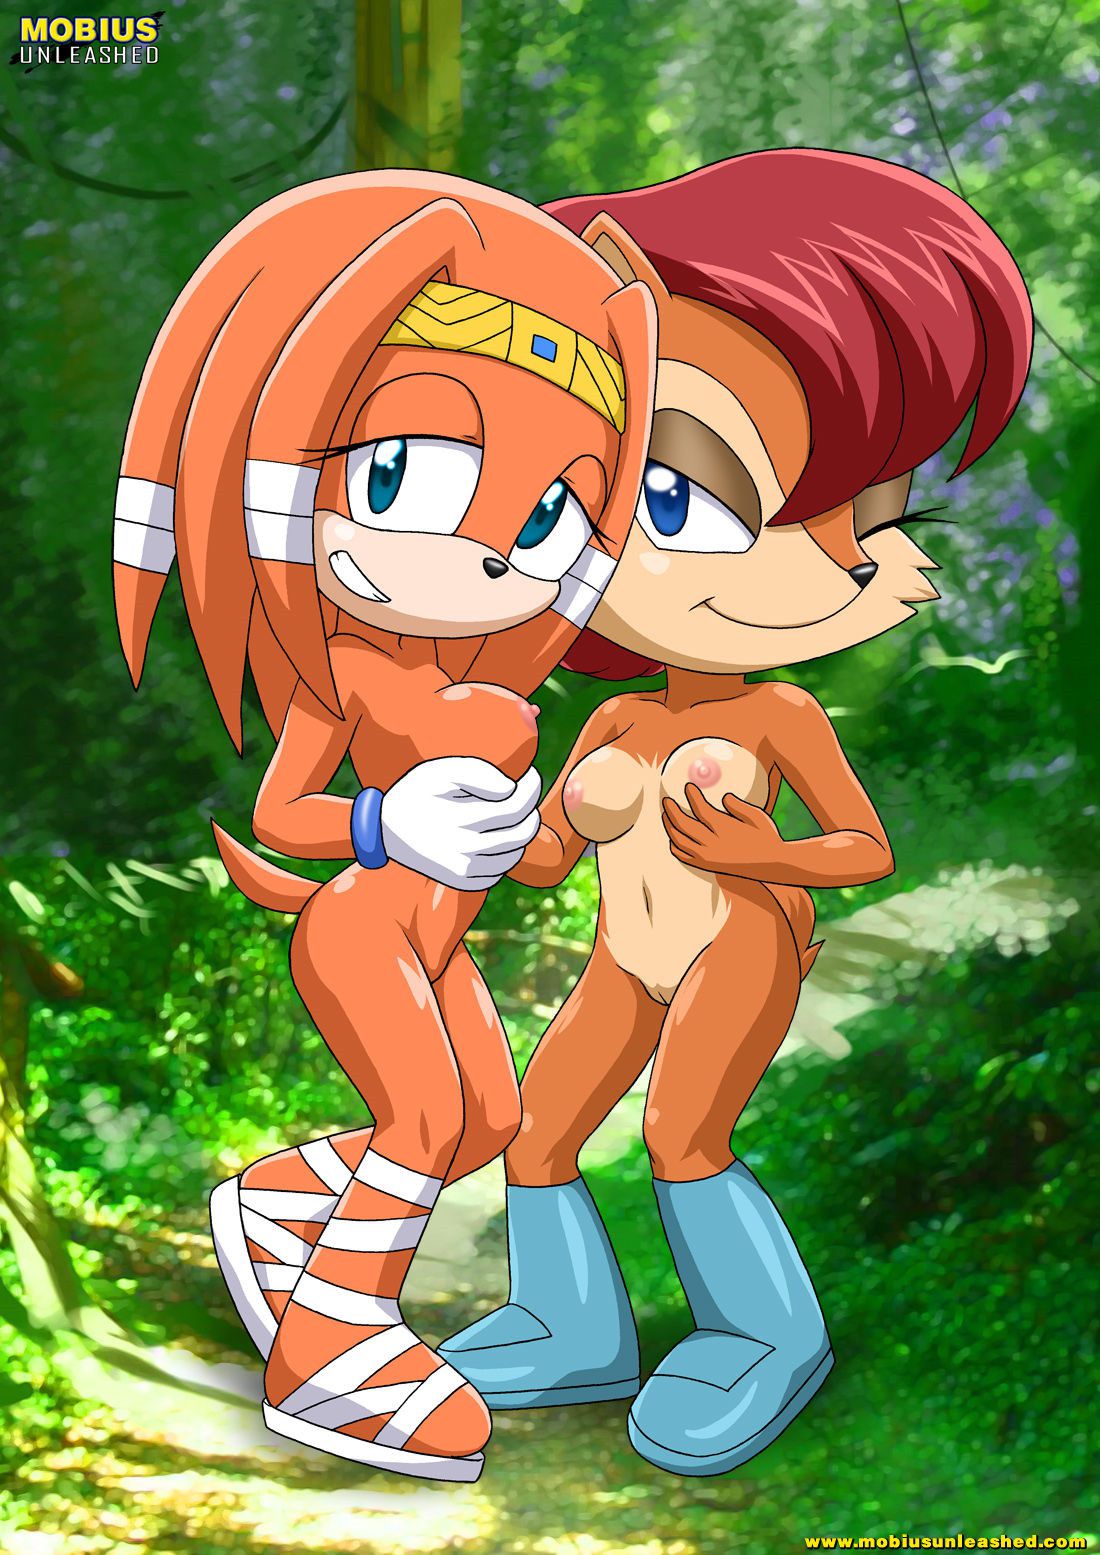 Mobius Unleashed: Tikal the Echidna 40